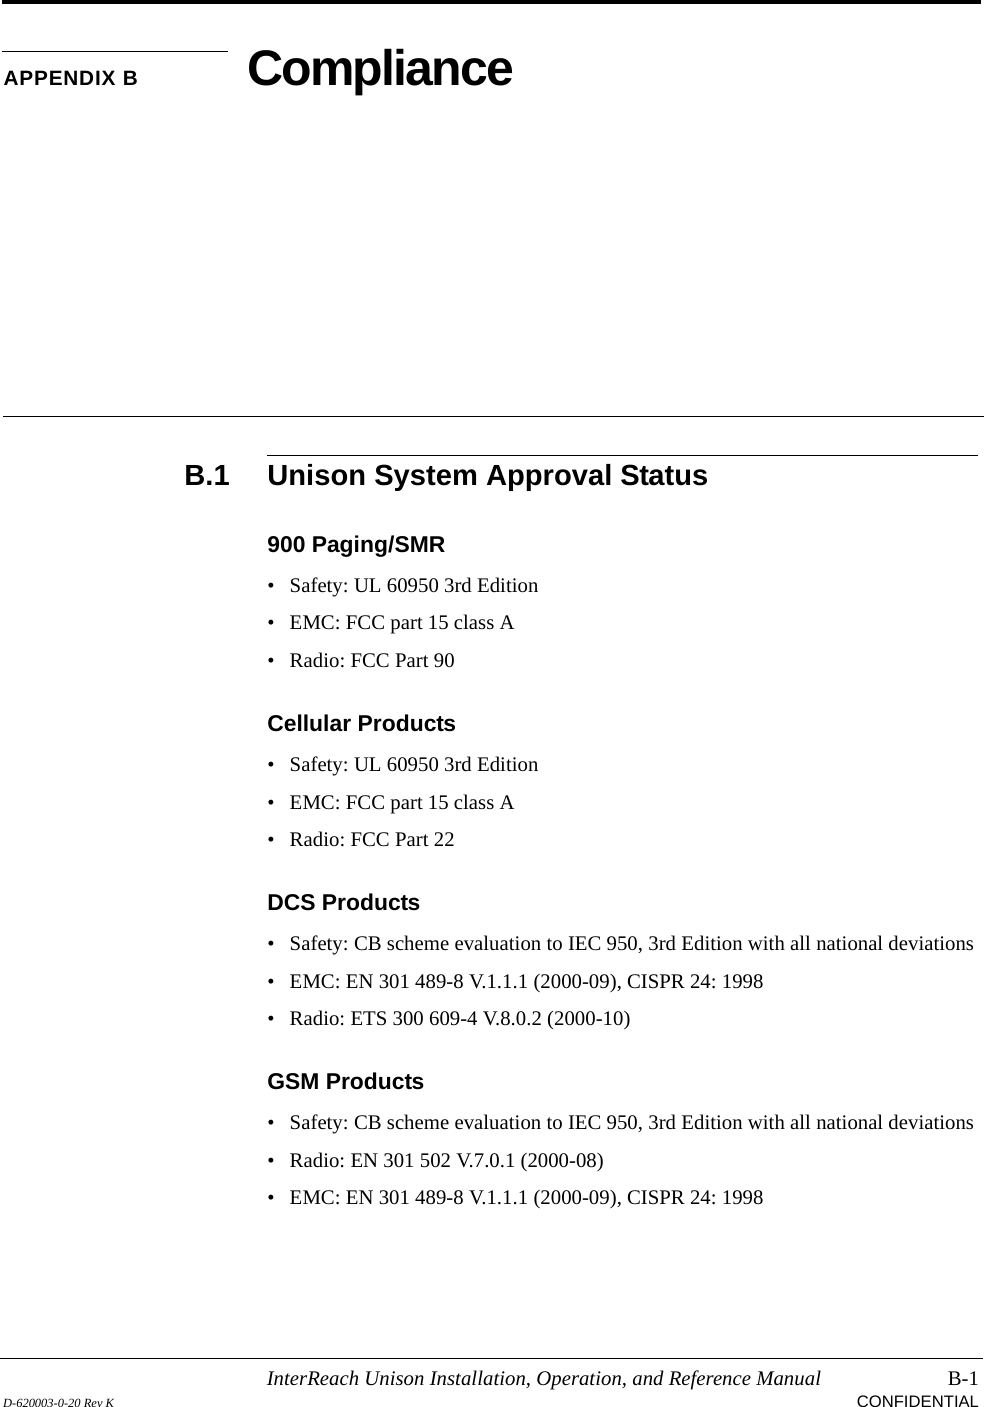 InterReach Unison Installation, Operation, and Reference Manual B-1D-620003-0-20 Rev K CONFIDENTIALAPPENDIX B ComplianceB.1 Unison System Approval Status900 Paging/SMR• Safety: UL 60950 3rd Edition• EMC: FCC part 15 class A• Radio: FCC Part 90Cellular Products• Safety: UL 60950 3rd Edition• EMC: FCC part 15 class A• Radio: FCC Part 22DCS Products• Safety: CB scheme evaluation to IEC 950, 3rd Edition with all national deviations• EMC: EN 301 489-8 V.1.1.1 (2000-09), CISPR 24: 1998• Radio: ETS 300 609-4 V.8.0.2 (2000-10)GSM Products• Safety: CB scheme evaluation to IEC 950, 3rd Edition with all national deviations• Radio: EN 301 502 V.7.0.1 (2000-08)• EMC: EN 301 489-8 V.1.1.1 (2000-09), CISPR 24: 1998